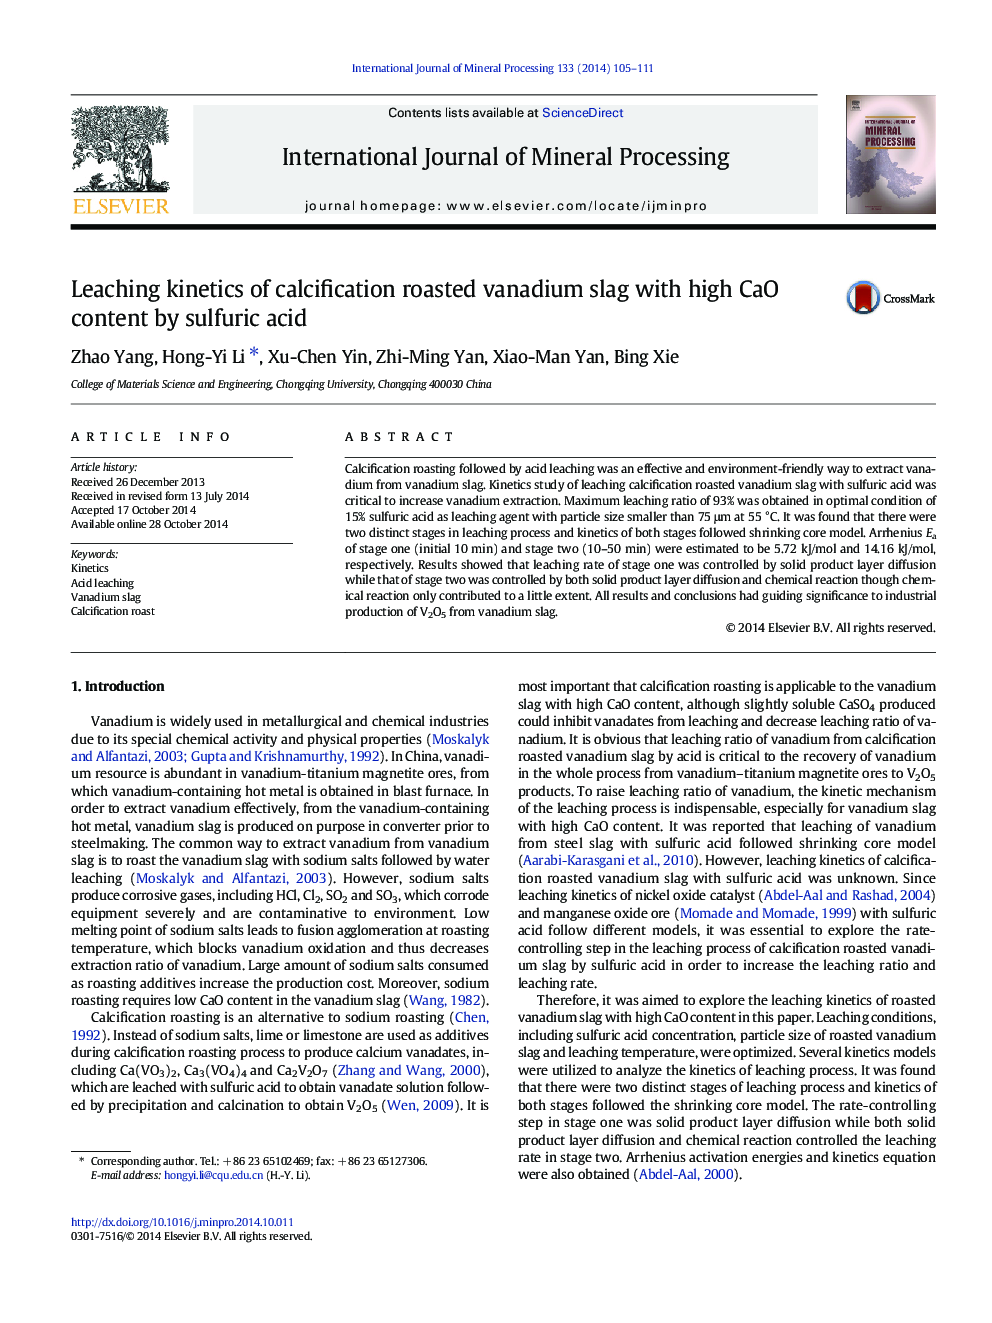 Leaching kinetics of calcification roasted vanadium slag with high CaO content by sulfuric acid